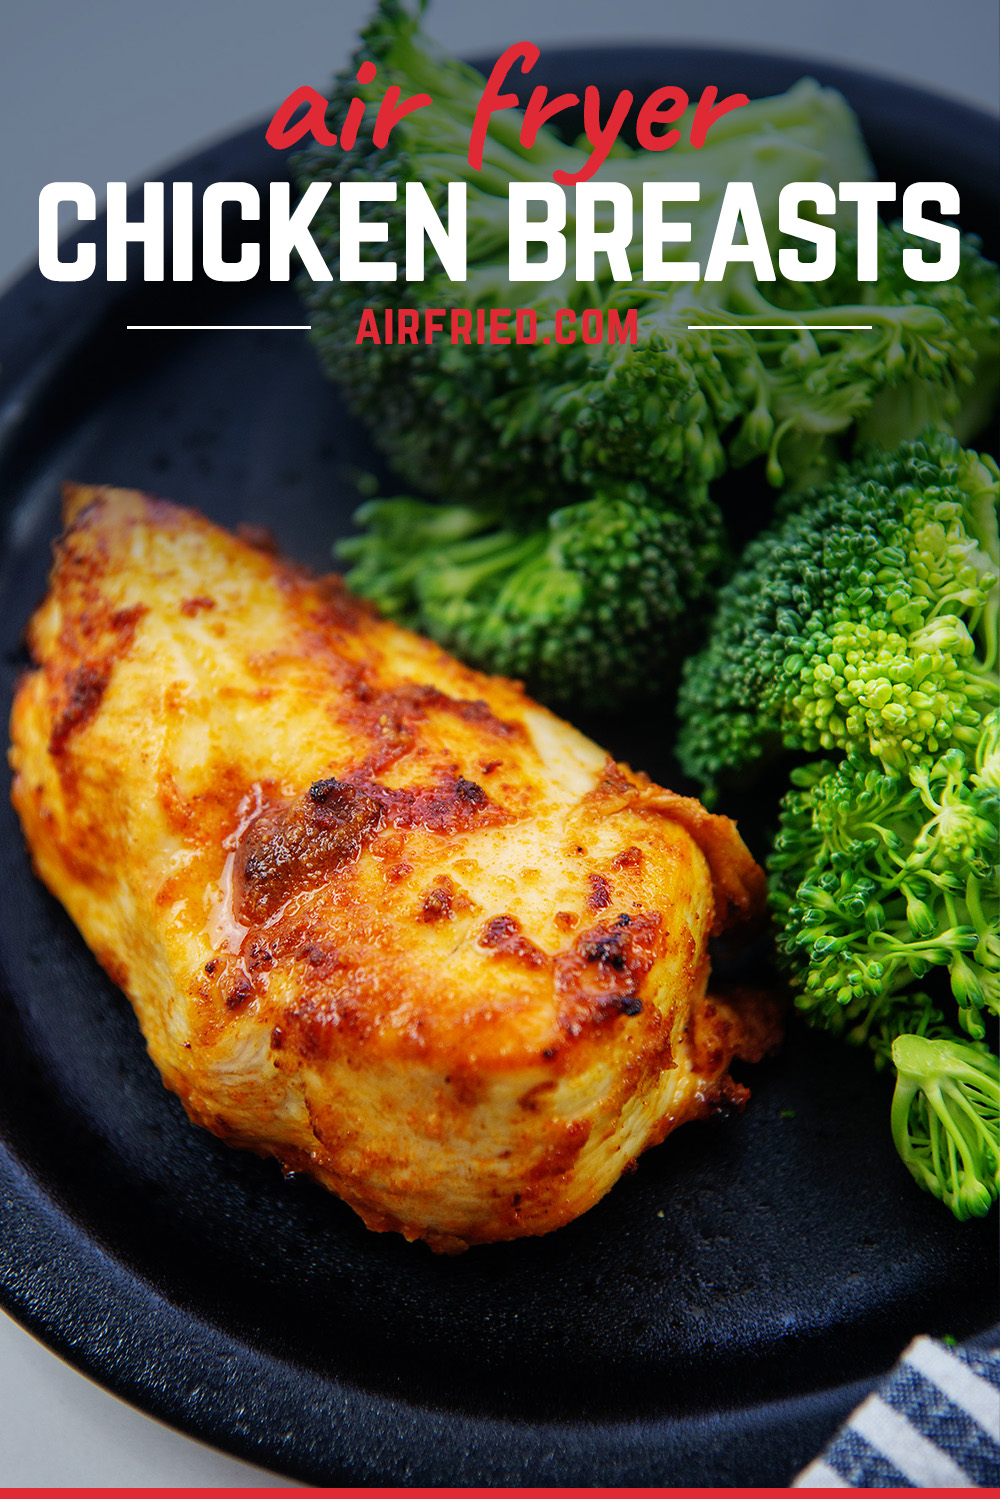 These chicken breasts cooked in the air fryer are tender and juicy every time we make them!